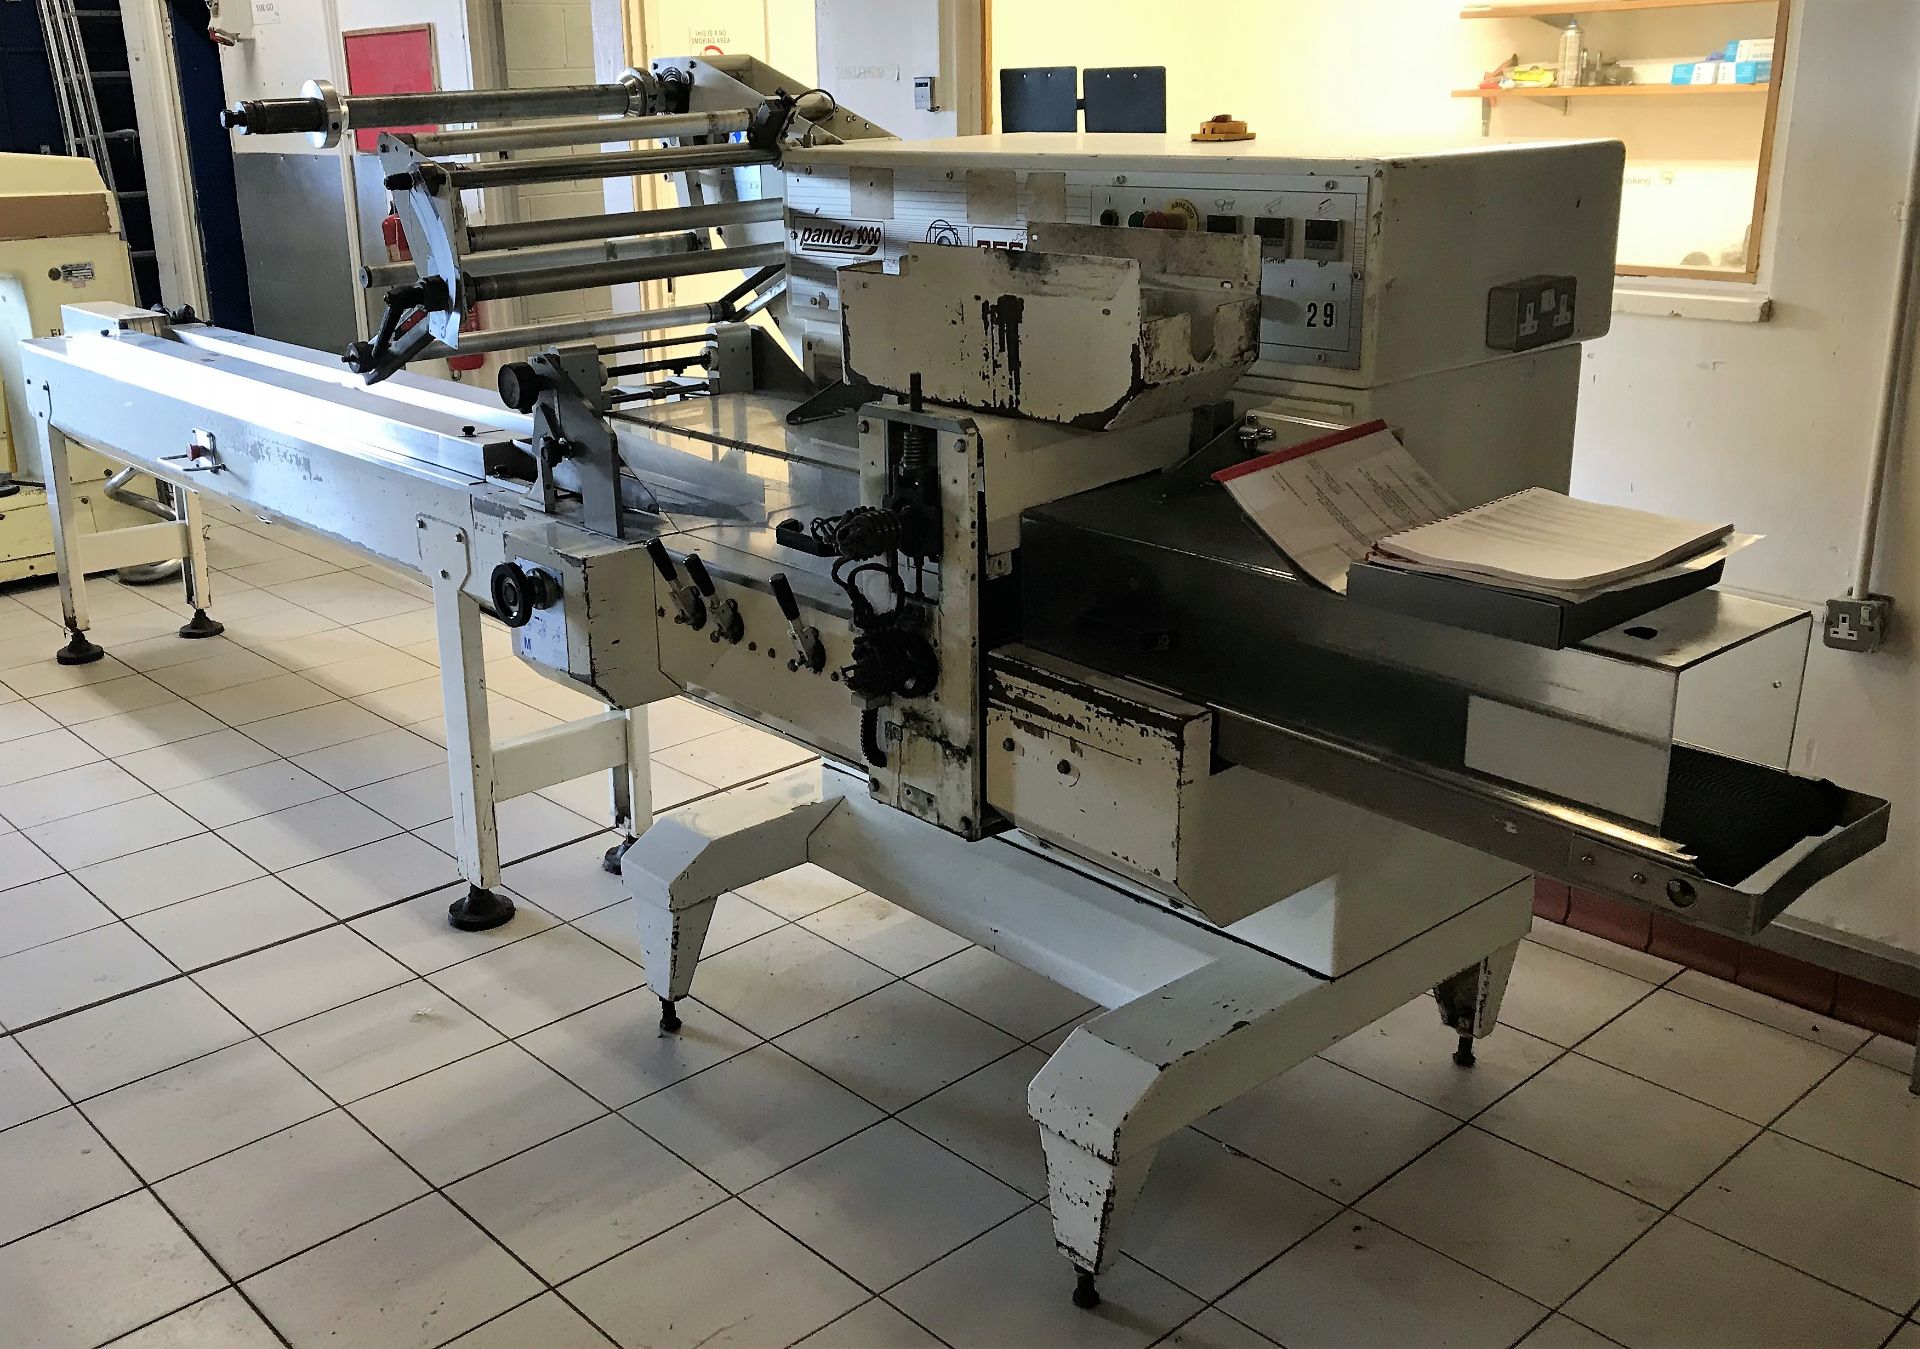 A Record Panda 1000 Flow Wrapping Machine No.03-95-097 (1996), 3ph-plug in; infeed 200mm x 850mm,